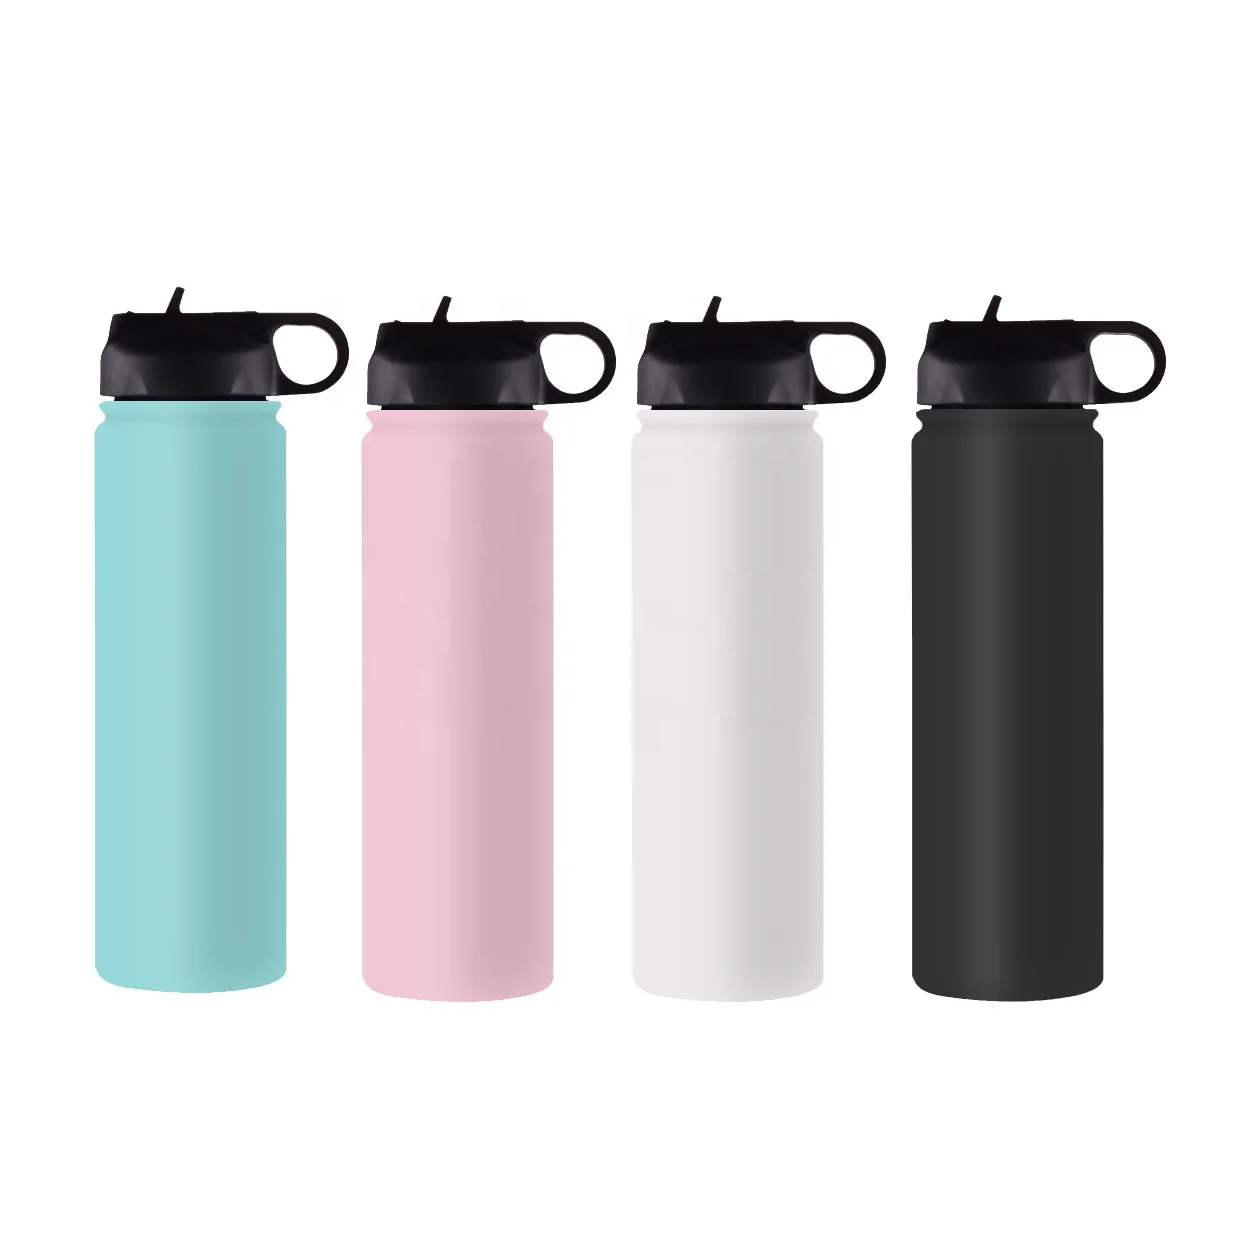 

Hot Sales Stainless Steel Vacuum Insulated 21 oz Water Bottle Thermos Vacuum Flask, White, black, pink, mint green or customized